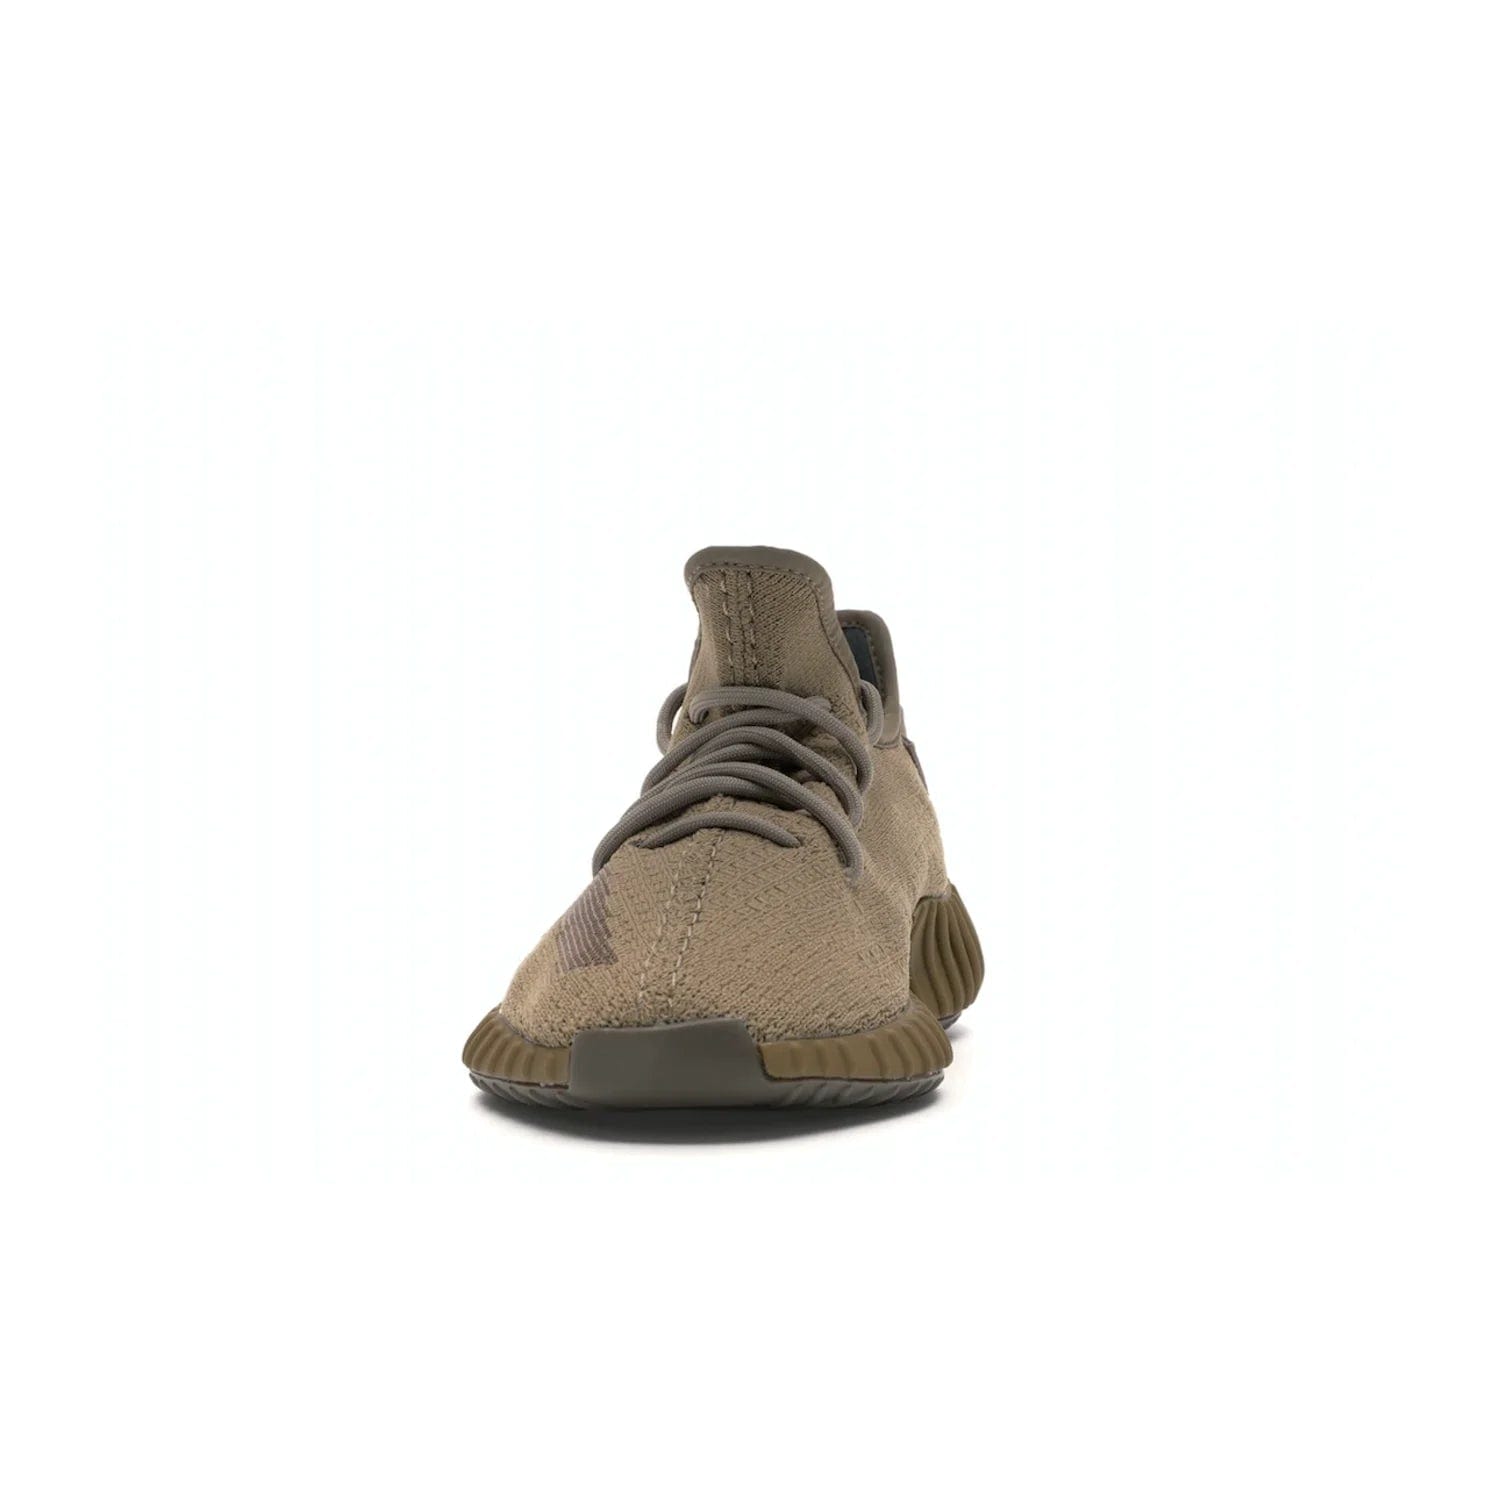 adidas Yeezy Boost 350 V2 Earth - Image 11 - Only at www.BallersClubKickz.com - Abstract style with the adidas Yeezy Boost 350 V2 Earth. Crafted with mud Primeknit upper, mud Boost and interior, and a translucent side stripe. Regional exclusive in Earth/Earth/Earth colorway, these fashionable sneakers released in February 2020. Showcase your style with the Yeezy 350 V2 Earth.